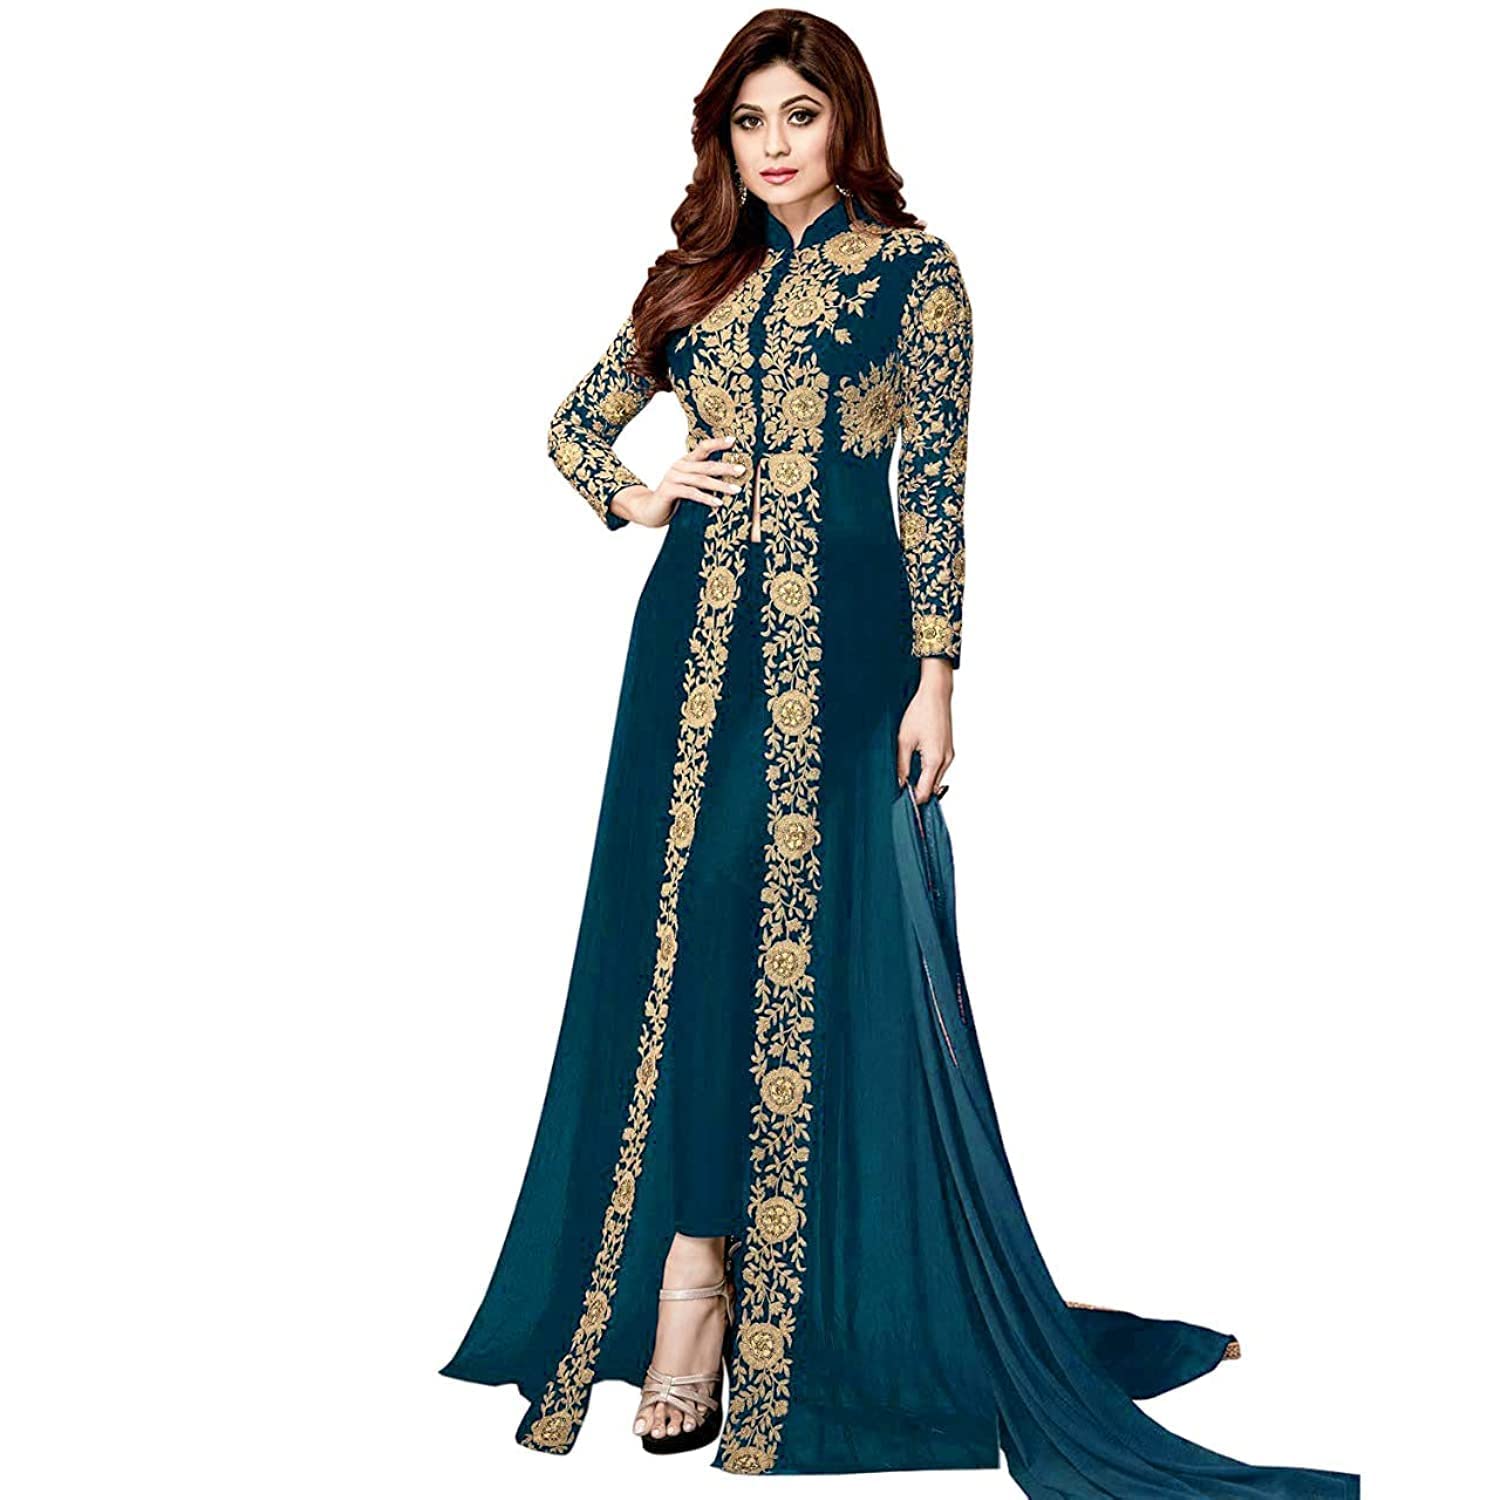 Florely Women's Embroidered Georgette Semi-Stiched Anarkali Gown with Dupatta -  DRESSES in Sri Lanka from Arcade Online Shopping - Just Rs. 7199!